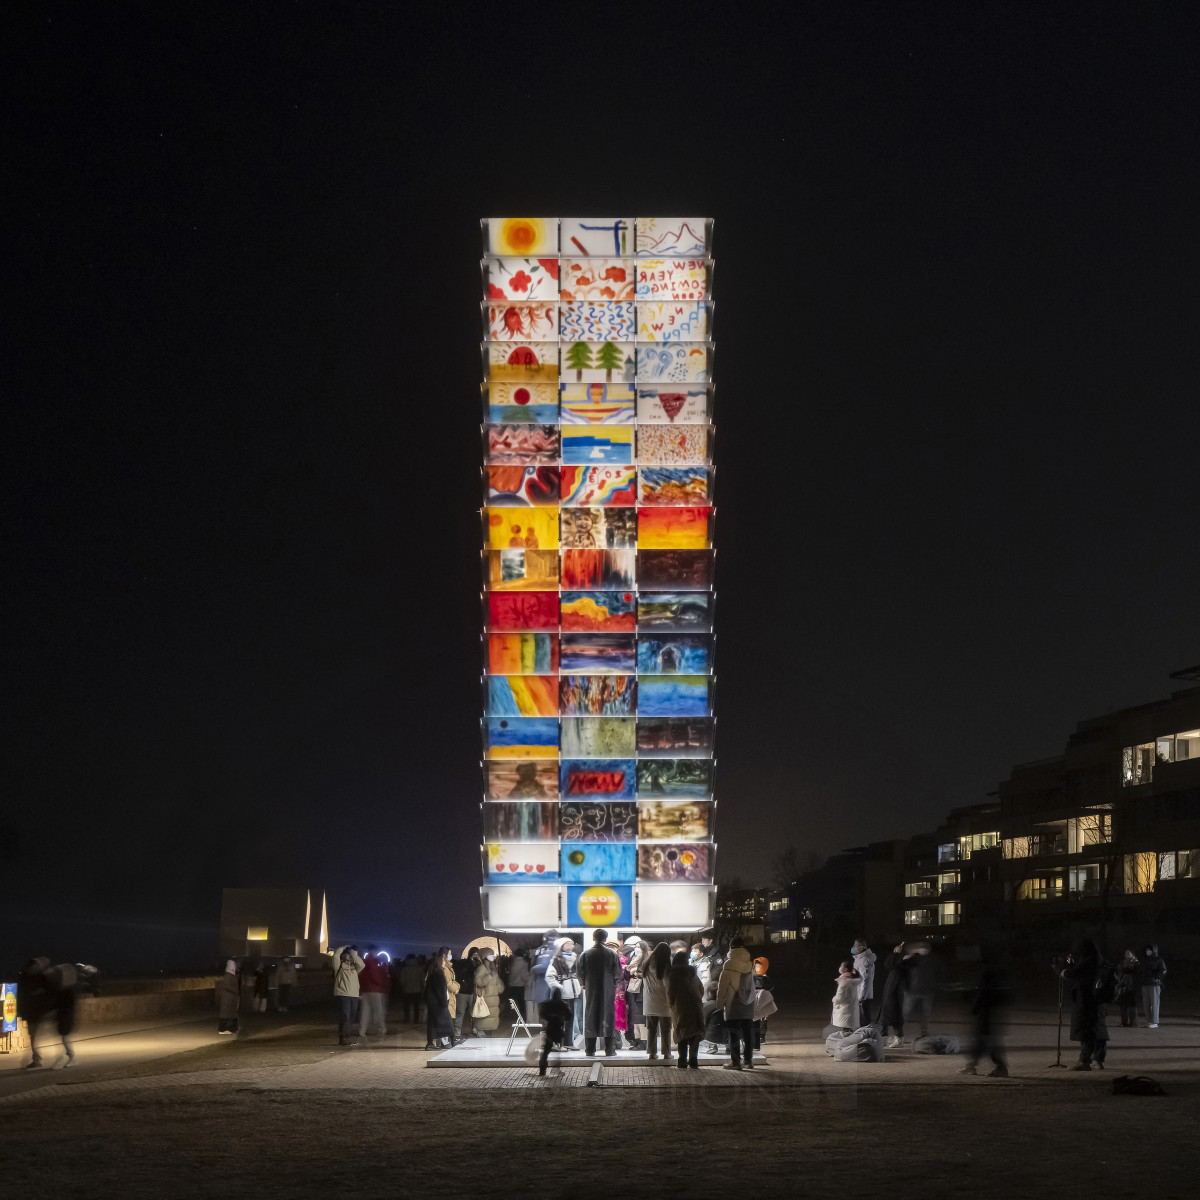 The Lighthouse Of Wishes Art Installation by Qirui Ma, Zhiyu Long and Pengxiang Lin Golden Fine Arts and Art Installation Design Award Winner 2024 